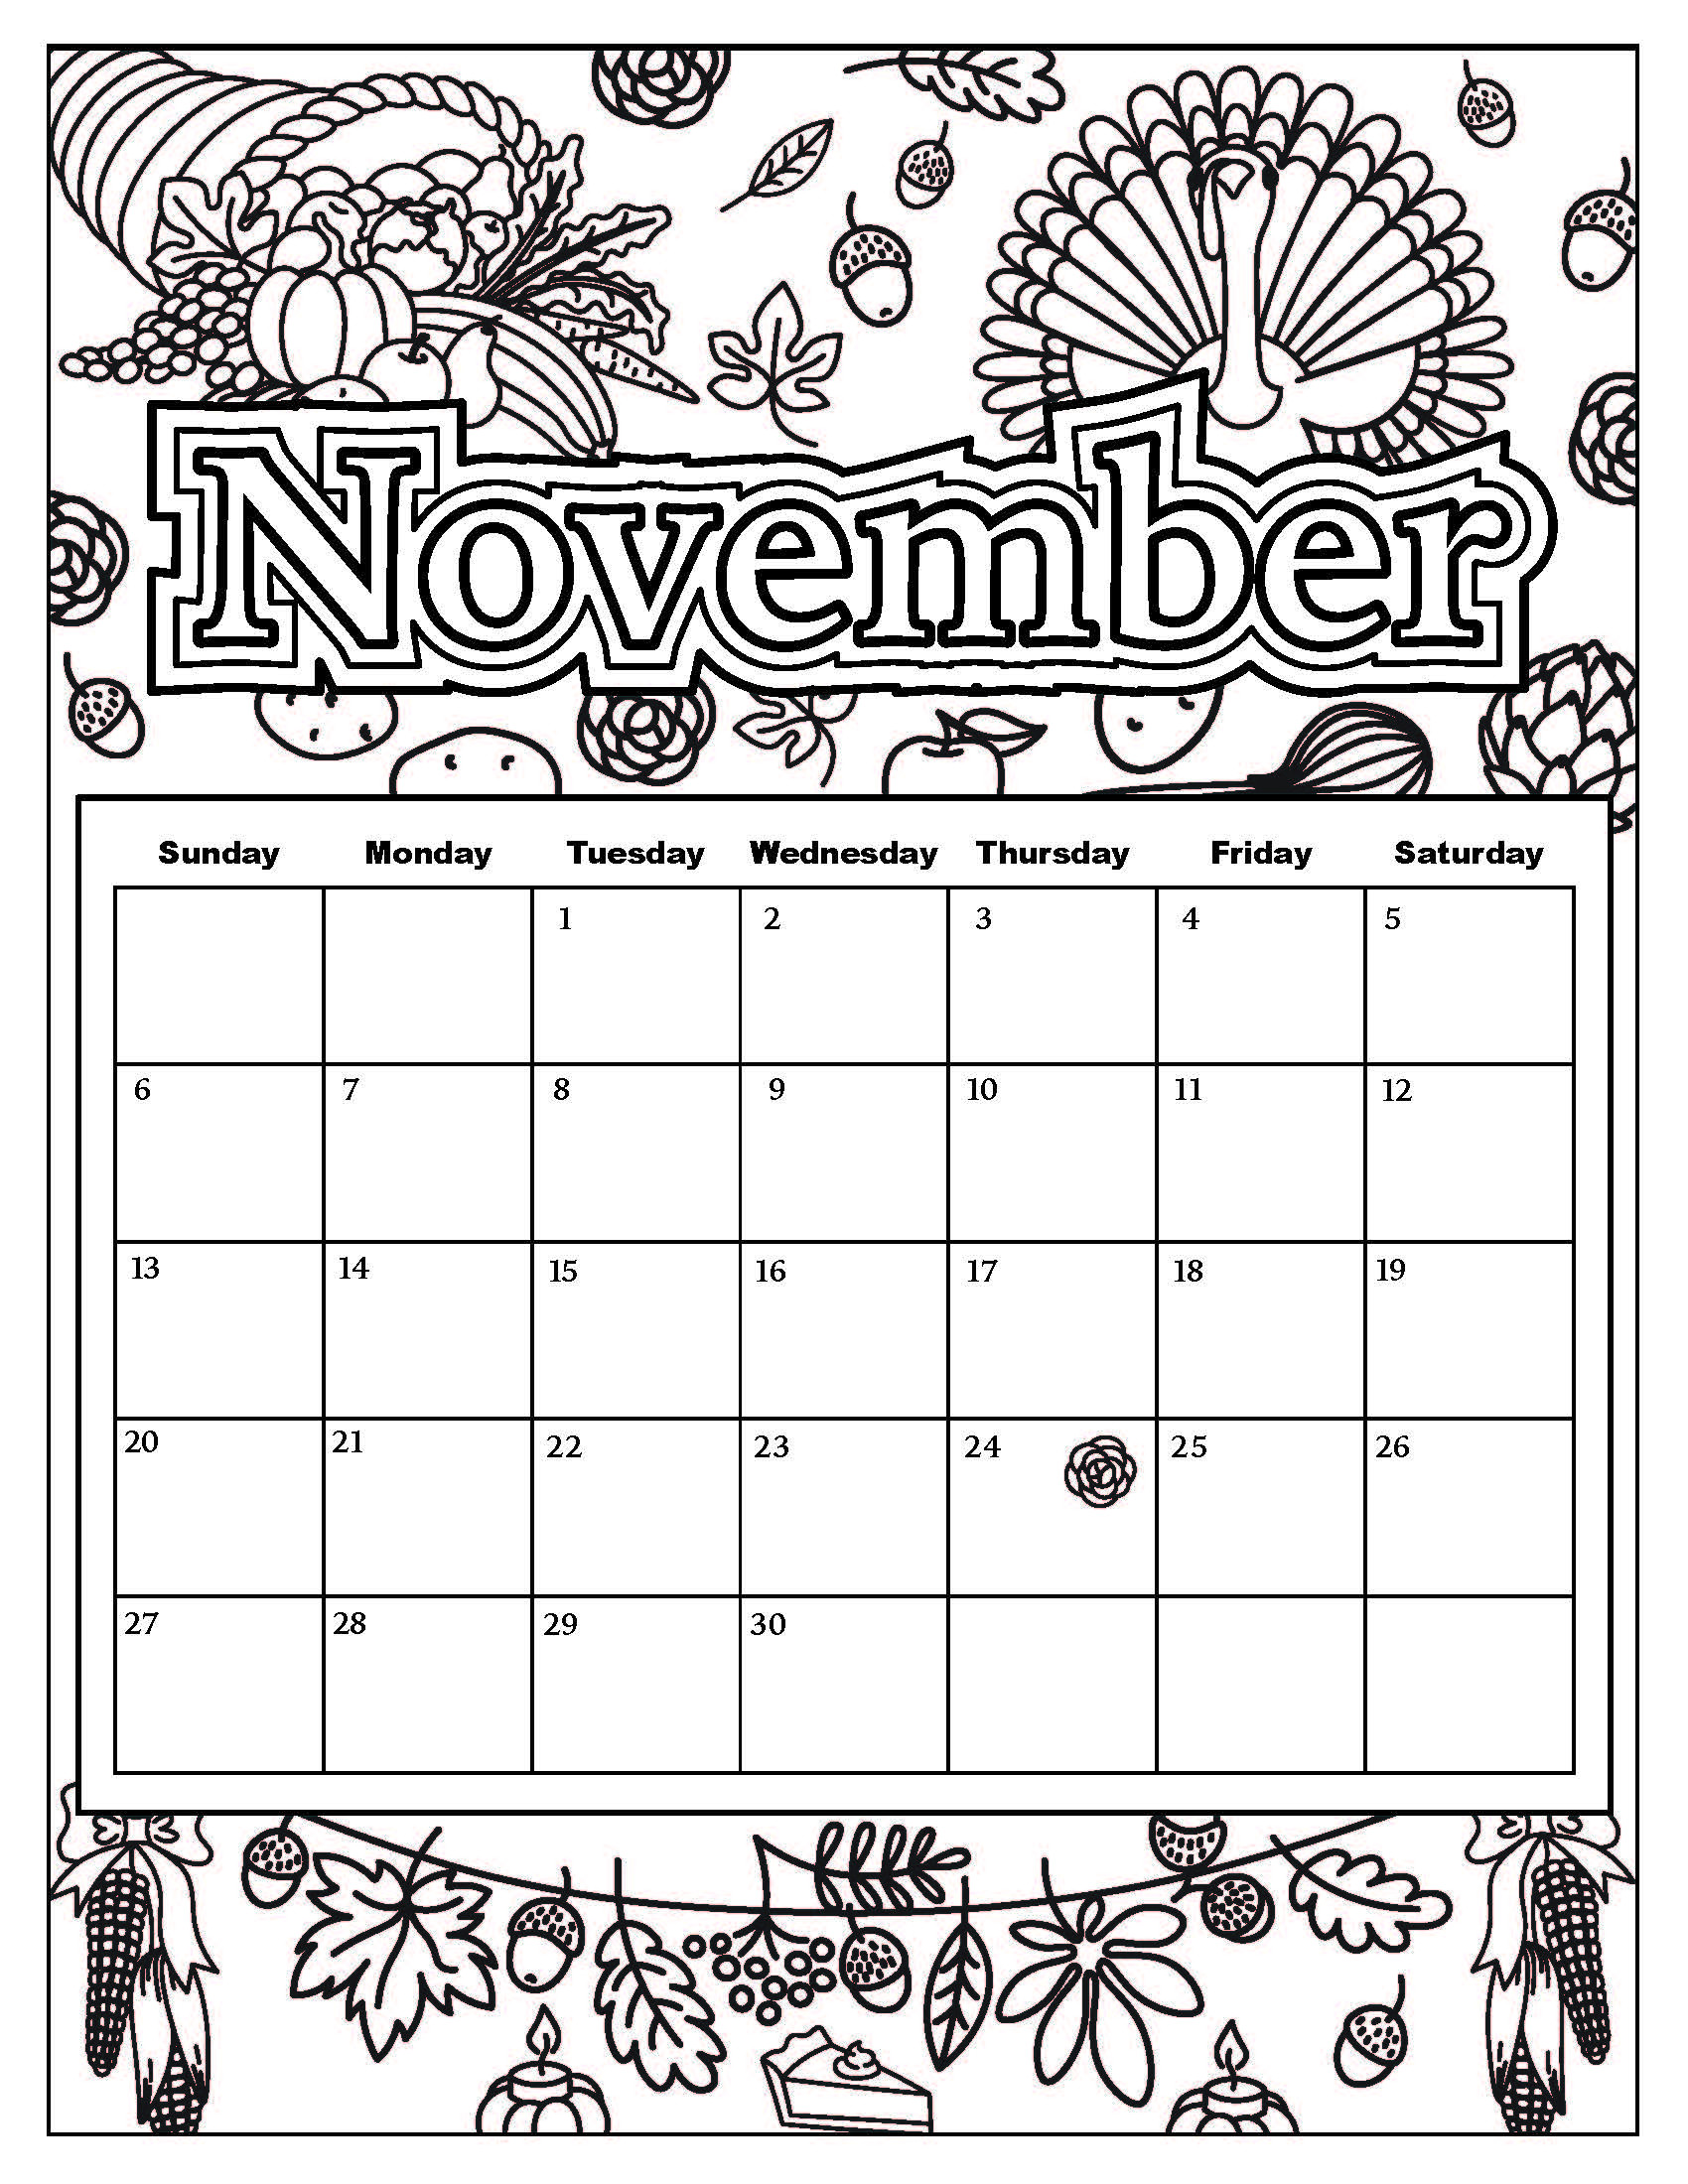 Calendar Coloring Pages At GetColorings Free Printable Colorings Pages To Print And Color